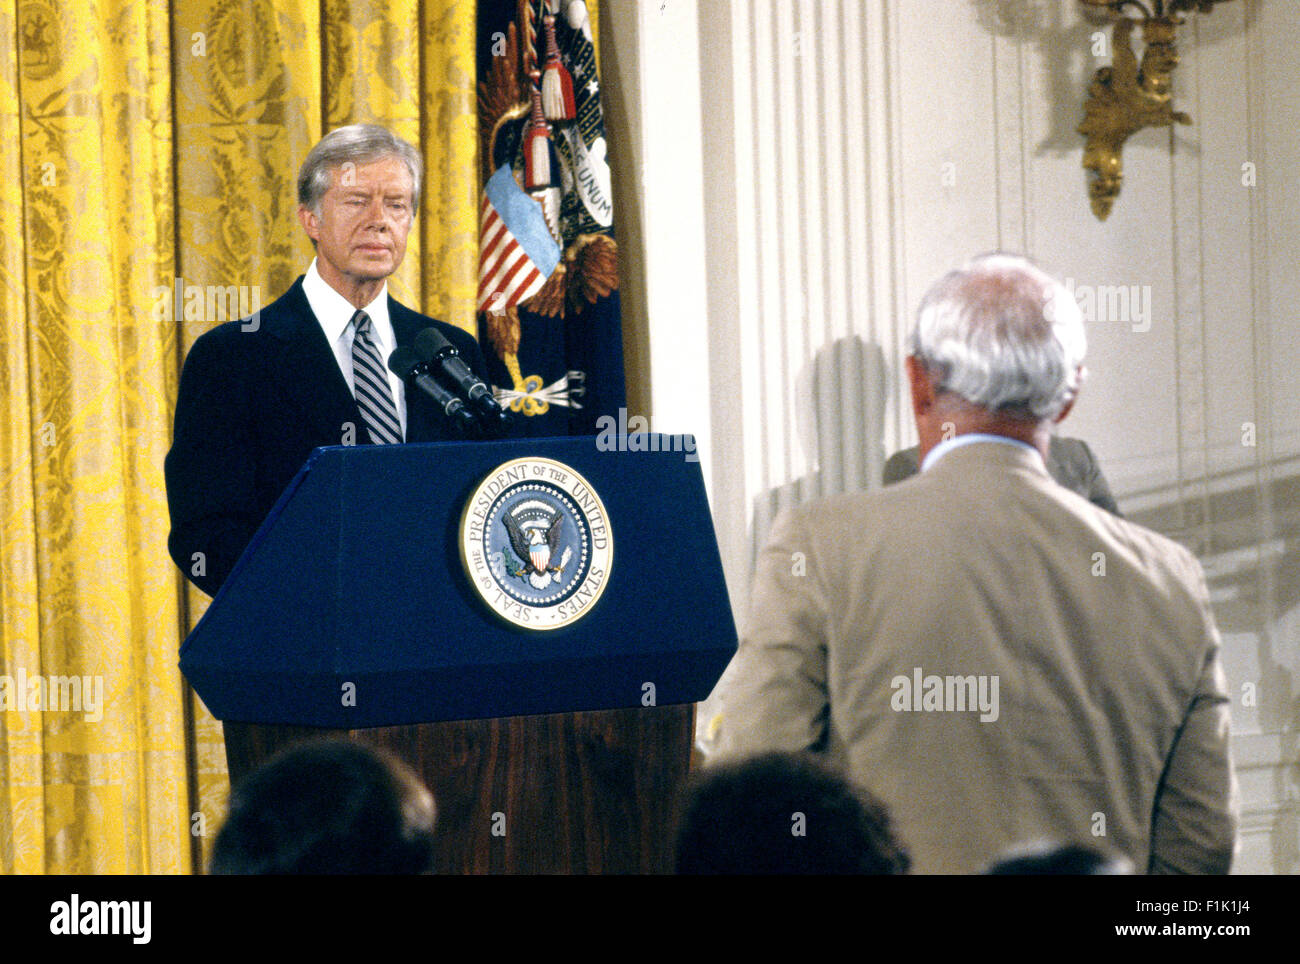 United States President Jimmy Carter listens to a reporter's question as he holds a press conference in the East Room of the White House in Washington, DC on August 4, 1980. The President discussed the scandal surrounding his brother Billy. Carter said there was no impropriety in his brother's activities and insisted neither he nor any member of his administration broke any laws. The President went on to say his brother tried to free the American hostages being held in Iran through his dealings with the Libyans. Credit: Benjamin E. 'Gene' Forte/CNP - NO WIRE SERVICE - Stock Photo